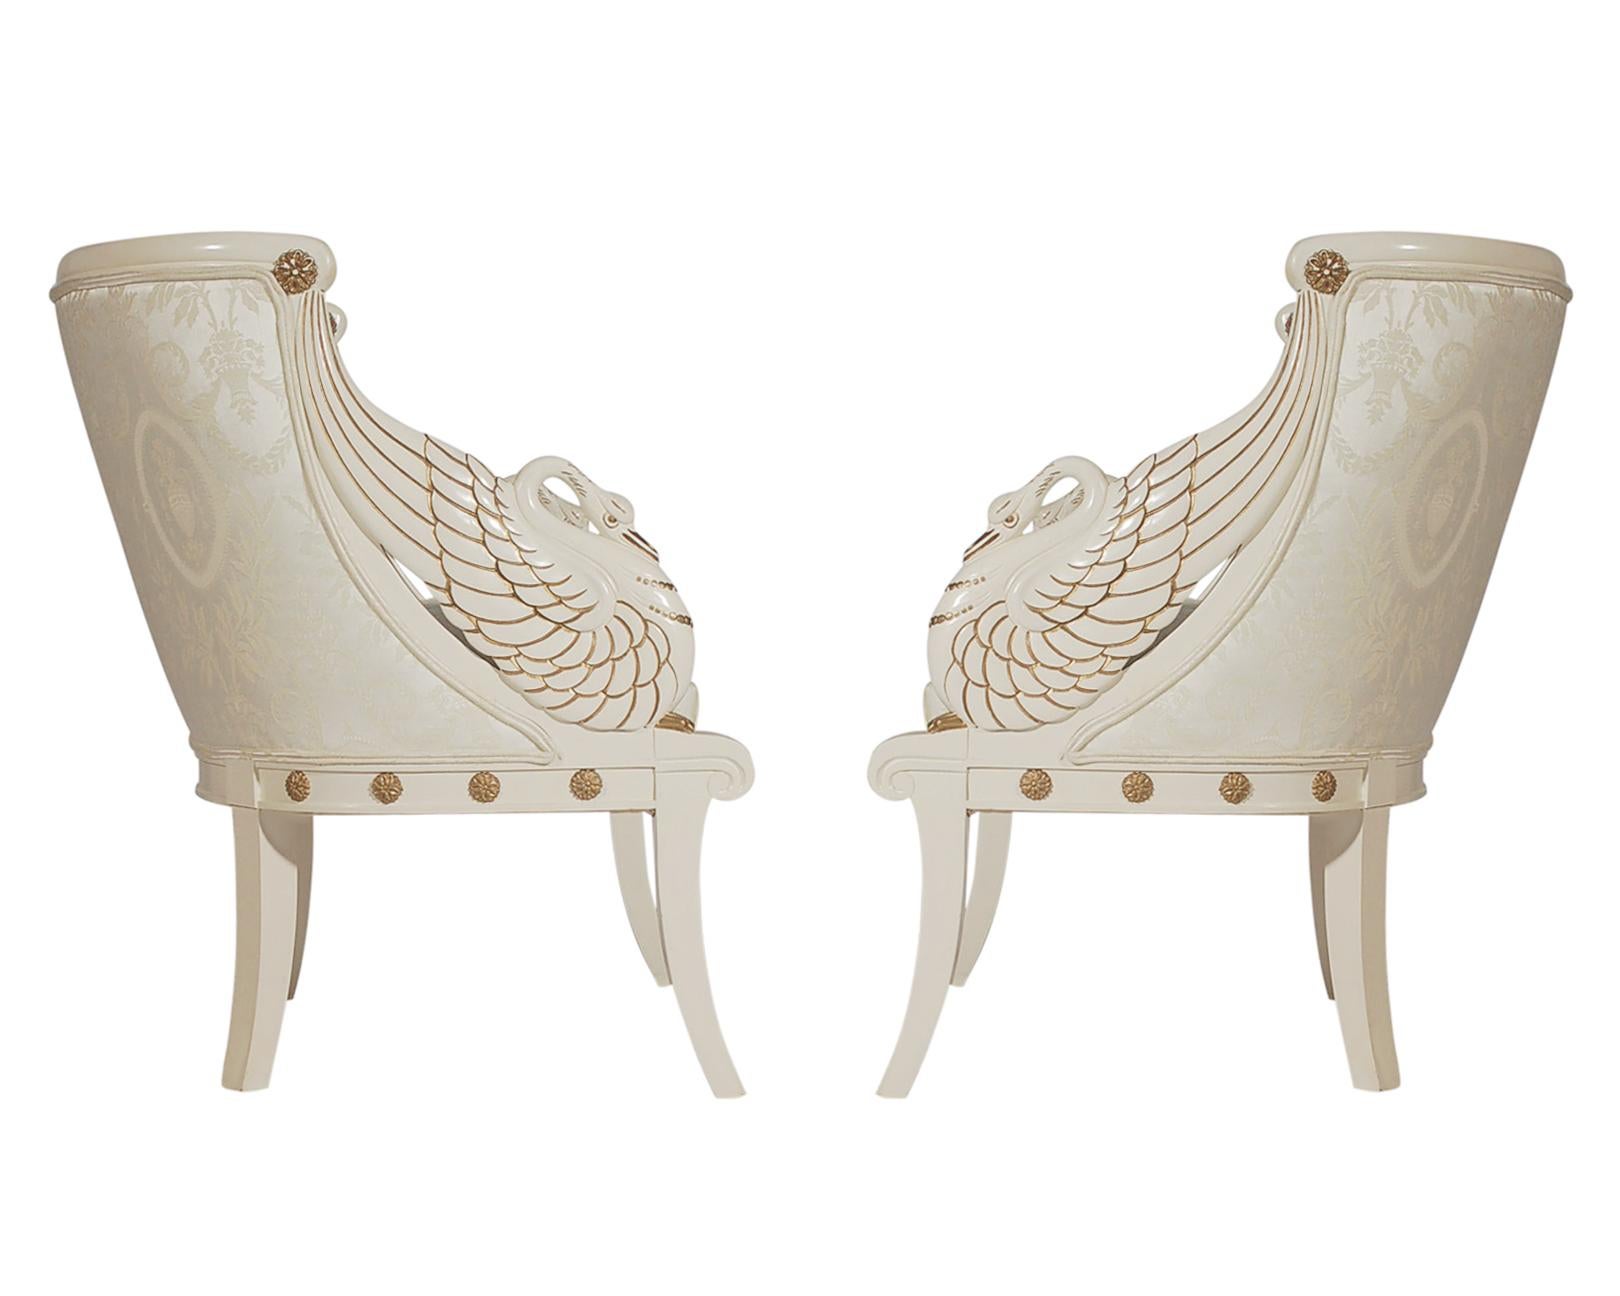 Matching Pair of Neoclassical Lacquered Carved Swan Armchair Lounge Chairs 4